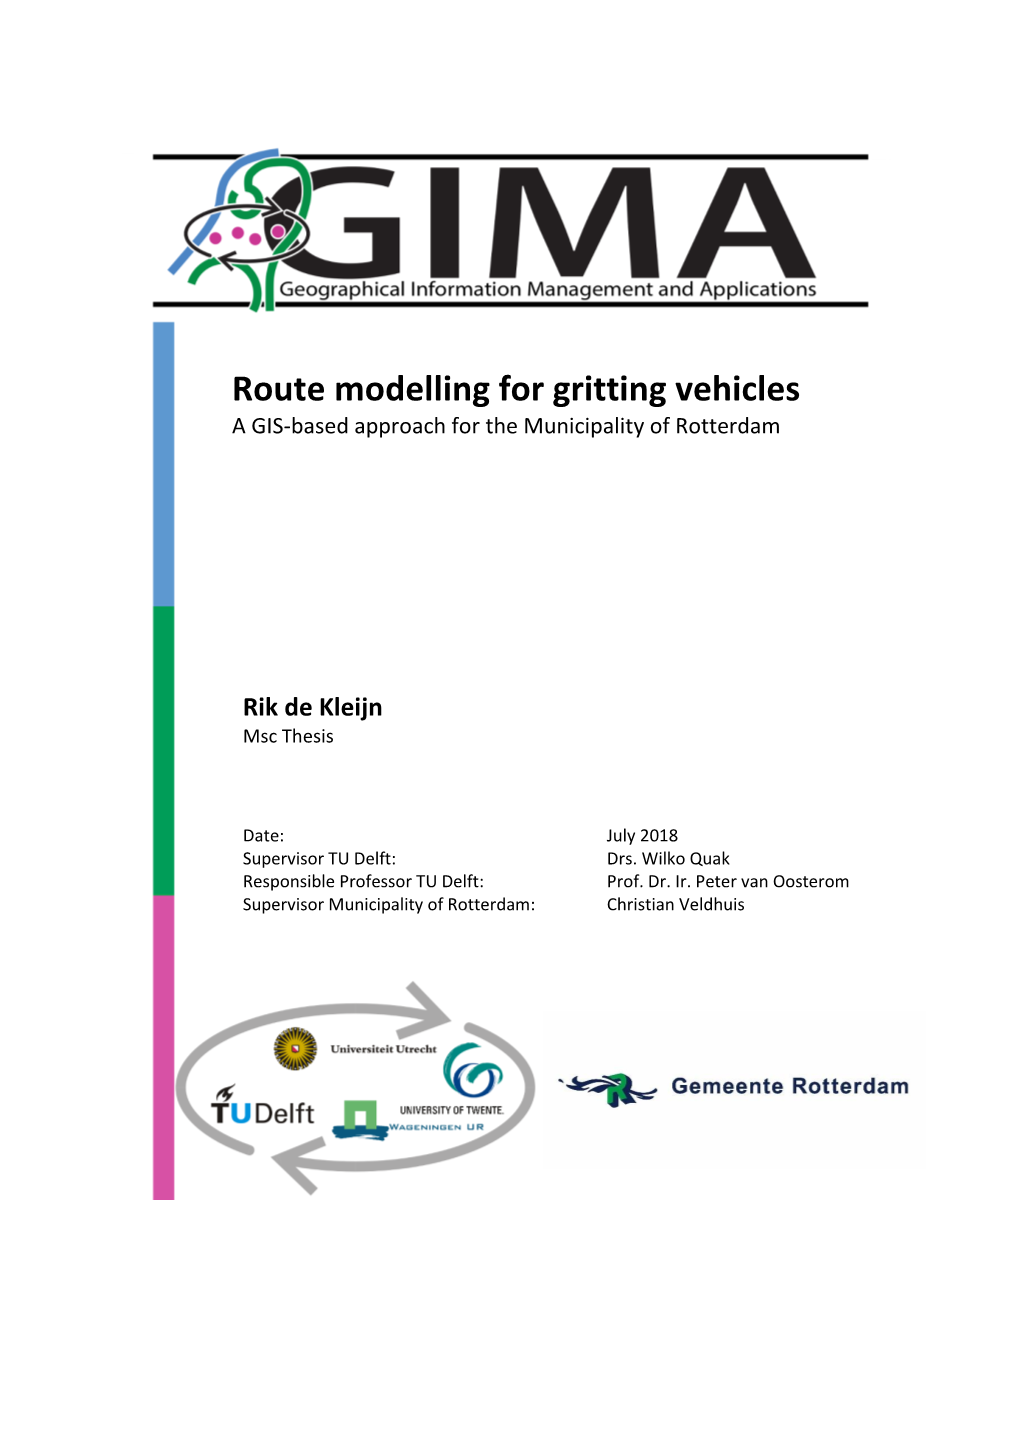 Route Modelling for Gritting Vehicles a GIS-Based Approach for the Municipality of Rotterdam